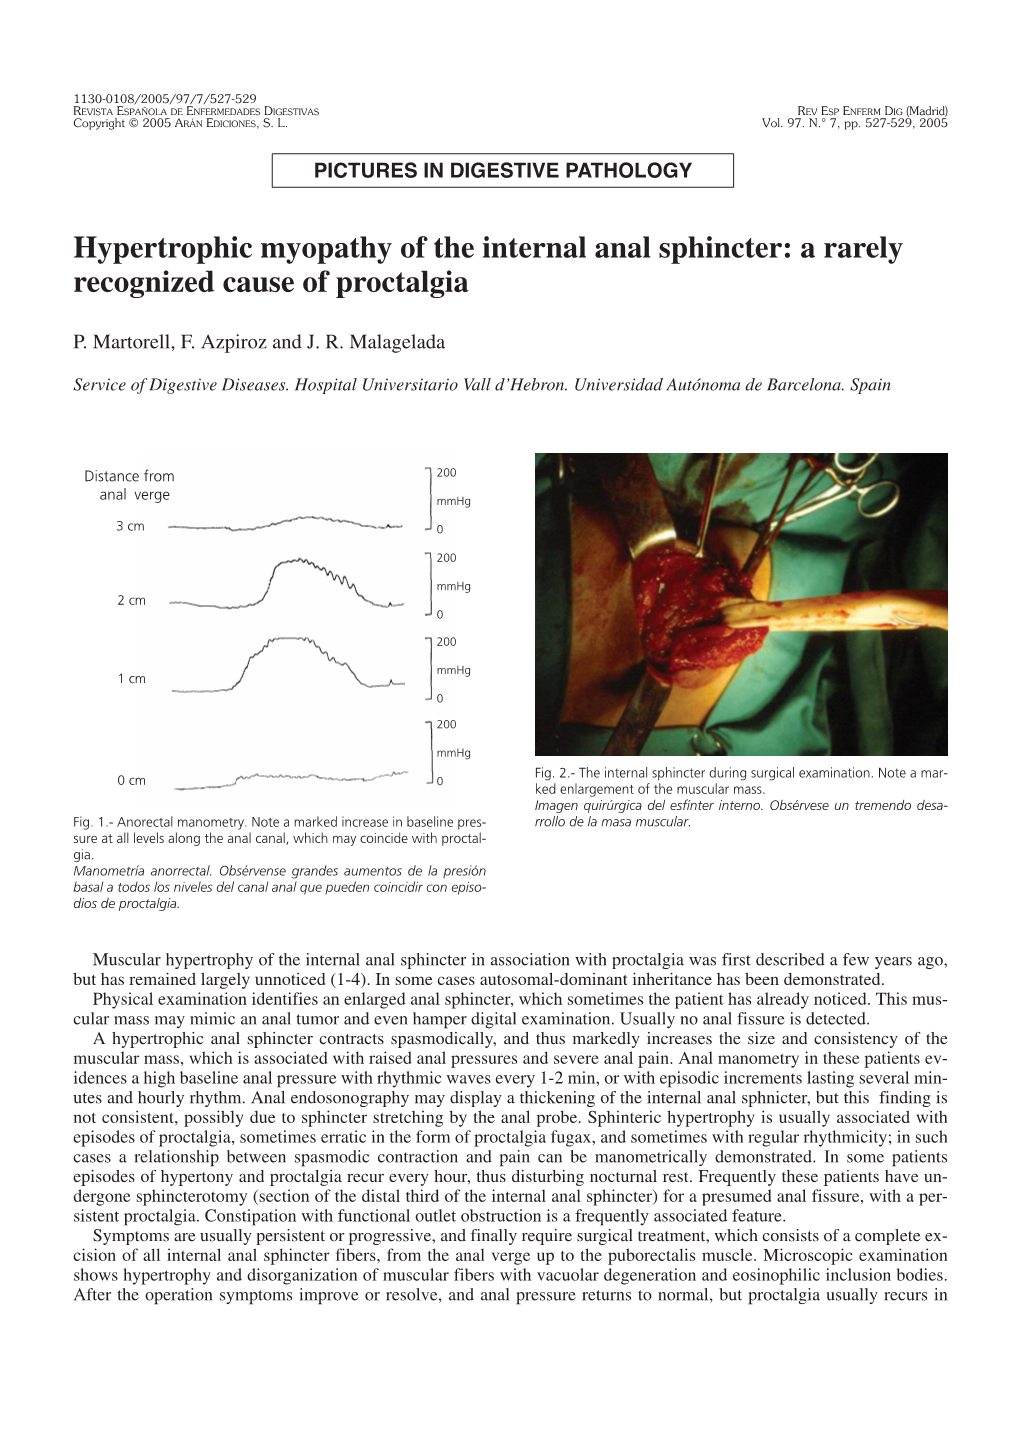 Hypertrophic Myopathy of the Internal Anal Sphincter: a Rarely Recognized Cause of Proctalgia